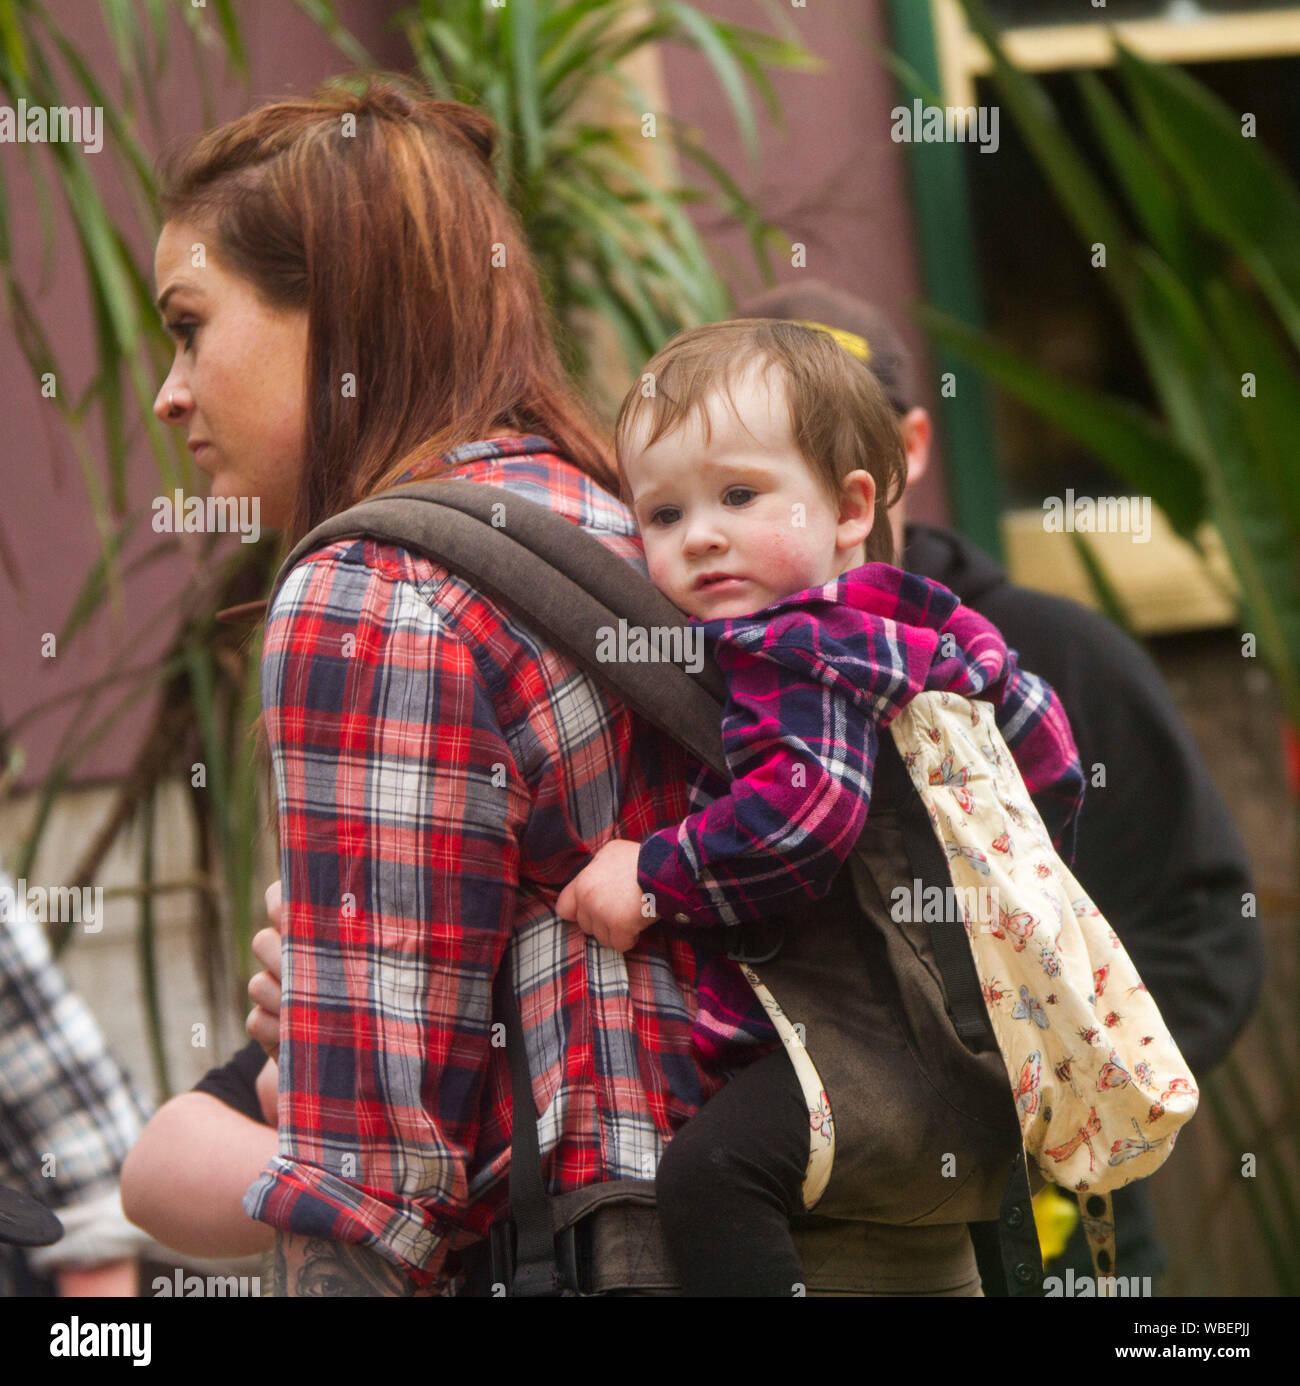 Young woman wearing bright red chequered shirt carrying baby on her back  - in NSW Australia Stock Photo